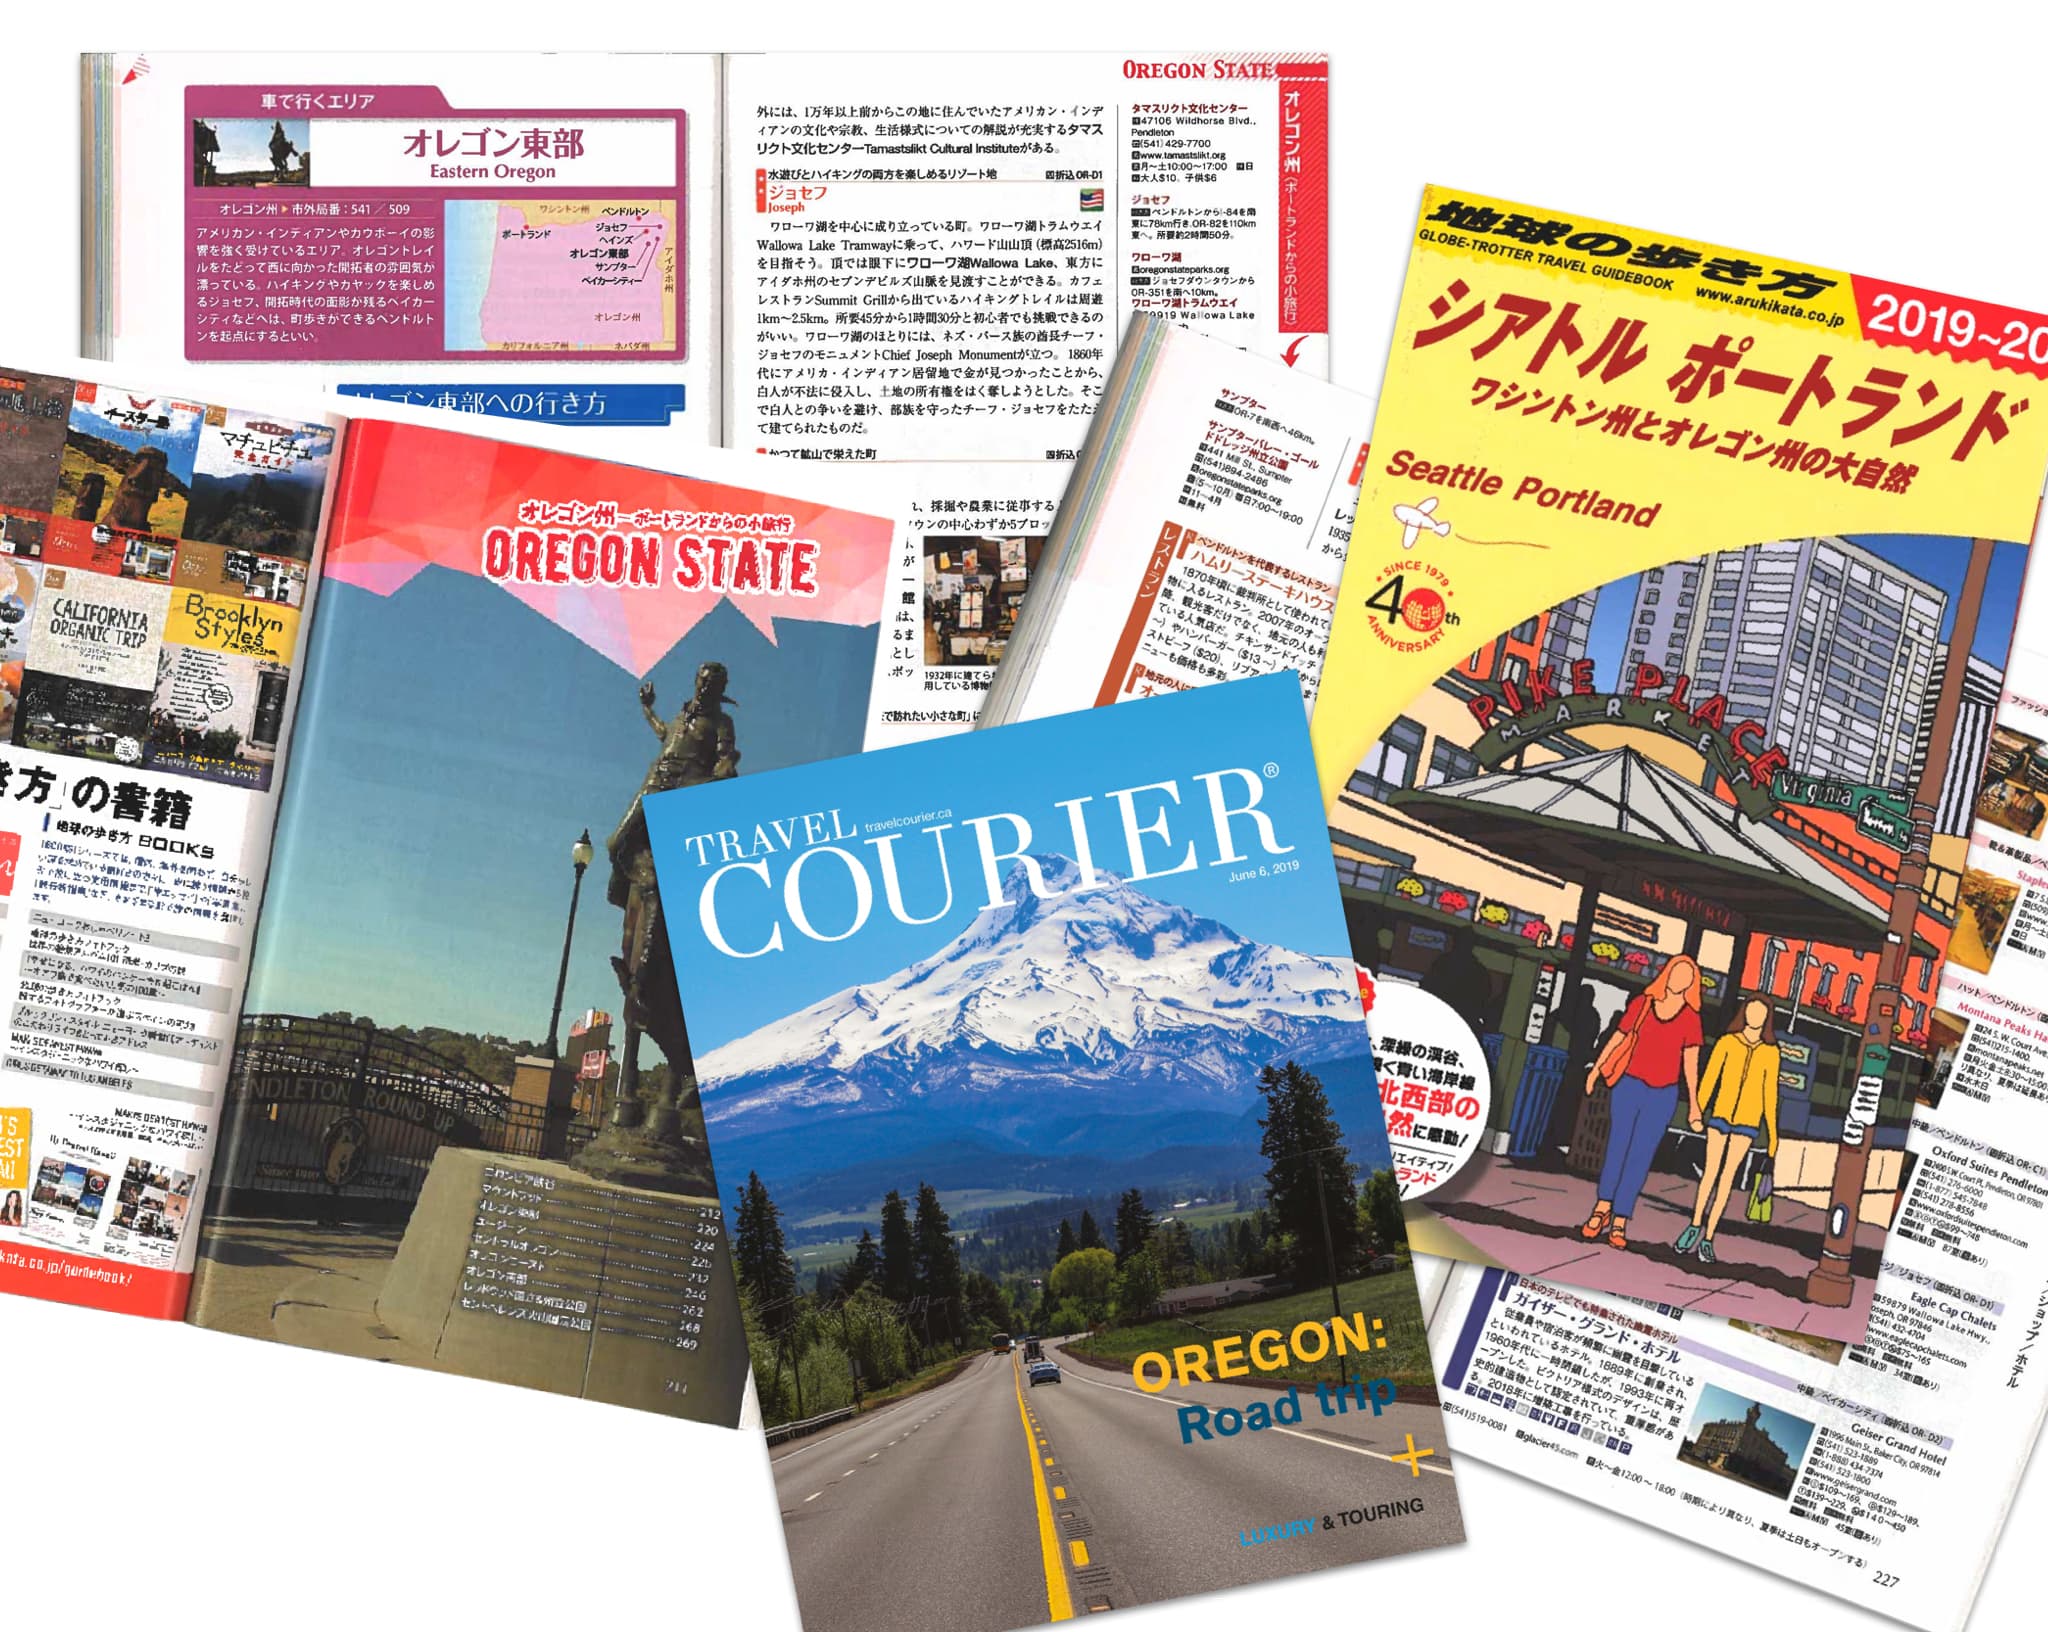 Pages, spreads, and covers of Japanese magazines in which Eastern Oregon's tourism postential is espoused.